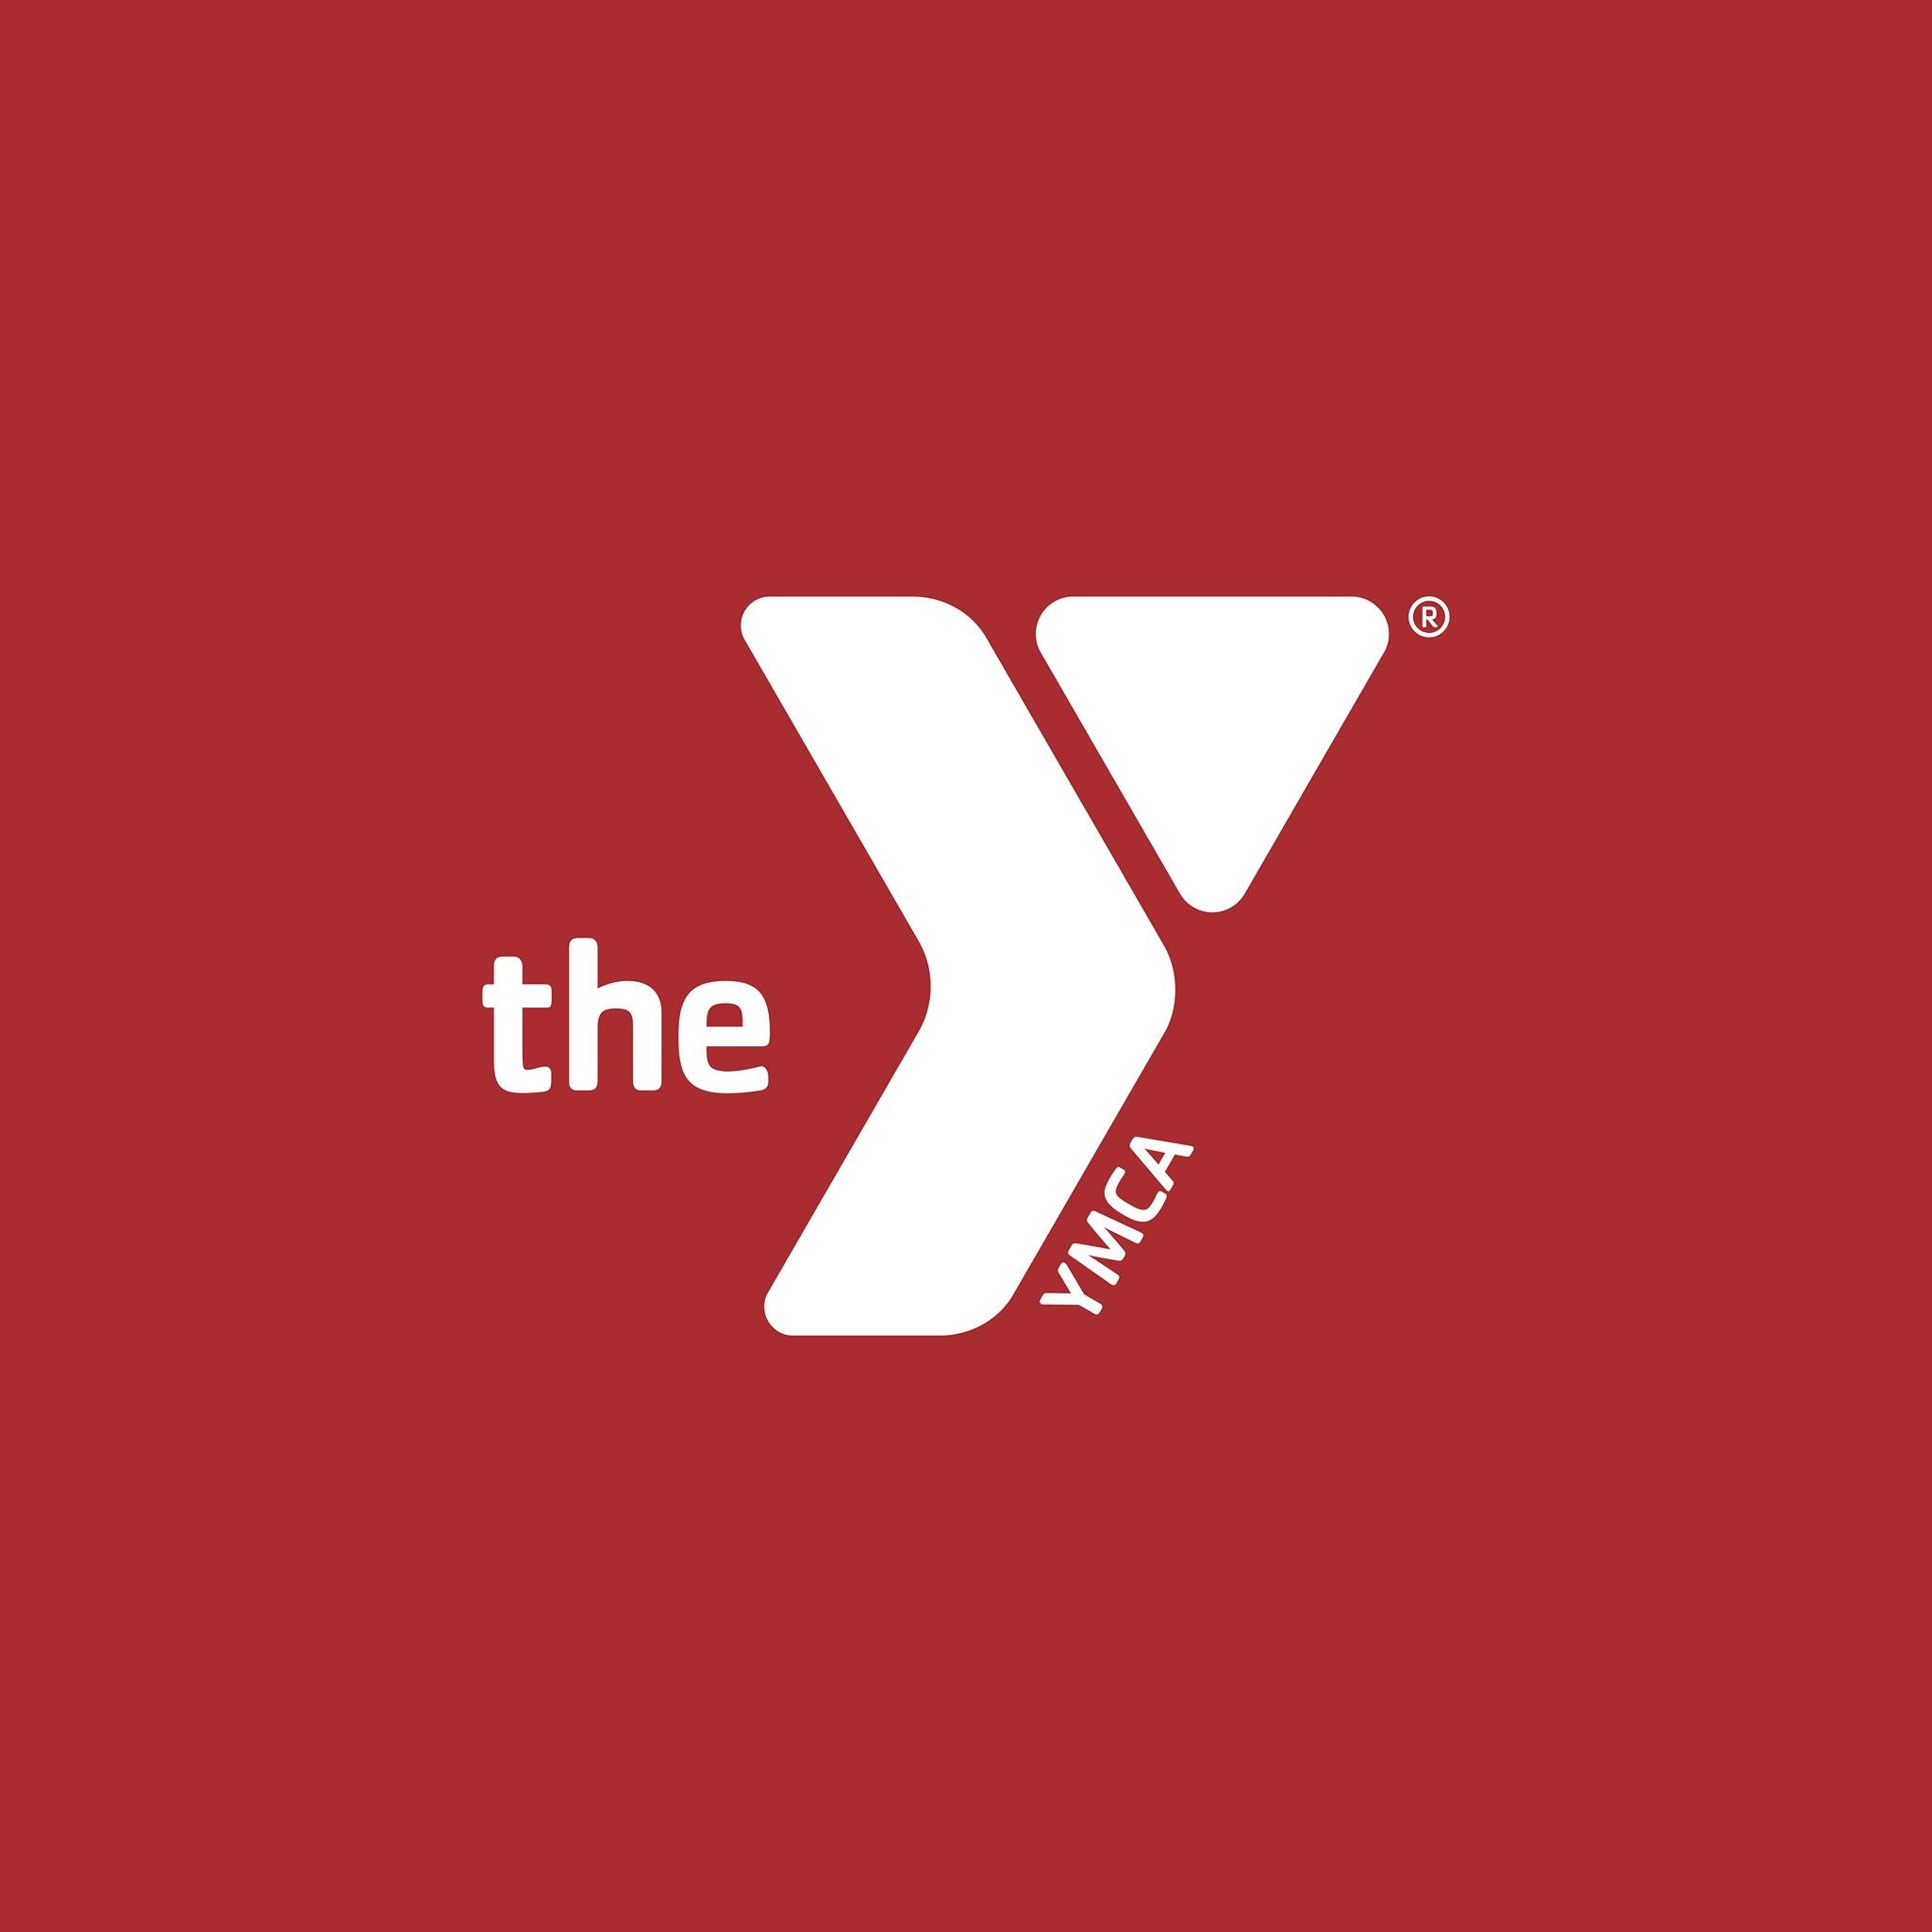 The Community Connection April 17th - Danville YMCA Healthy Kids Day